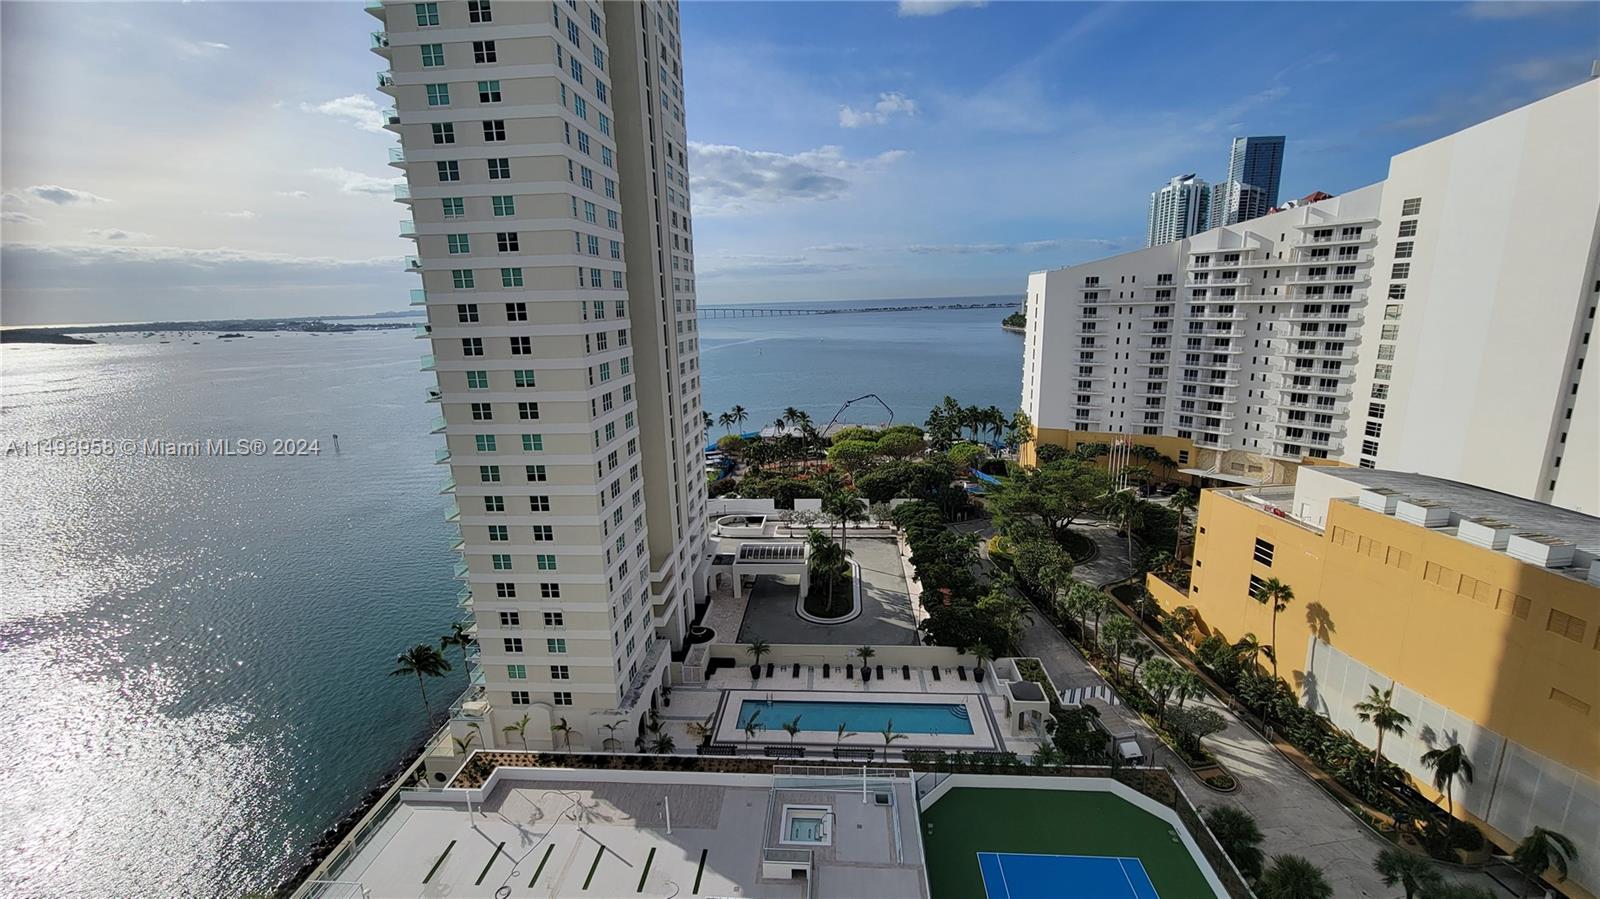 VIEWS, VIEWS, VIEWS! Biscayne Bay and Brickell skyline at its BEST. Spacious 1-bedroom 735 sq. ft. inside desirable Brickell Key Island neighborhood. BEST PRICE IN THE BUILDING on the 19th floor with all the amenities this condo building has to offer, just finishing a total upgrade of the 4th floor pool, tennis court, and mini golf area. All amenities, gym with direct ocean views on the 2nd floor, a large, well-equipped business center on the 3rd floor. Unit has white tile floors throughout, Bosch Heat Pump system installed new in 2021, Washer and dryer, balcony. Walk out the back door to the pedestrian boardwalk that wraps around the island and connects to the famous Miami City Center. * ATTENTION INVESTORS: TENANT OCCUPIED WITH A LEASE THRU 09/30/2024; same tenant for past 5 years.